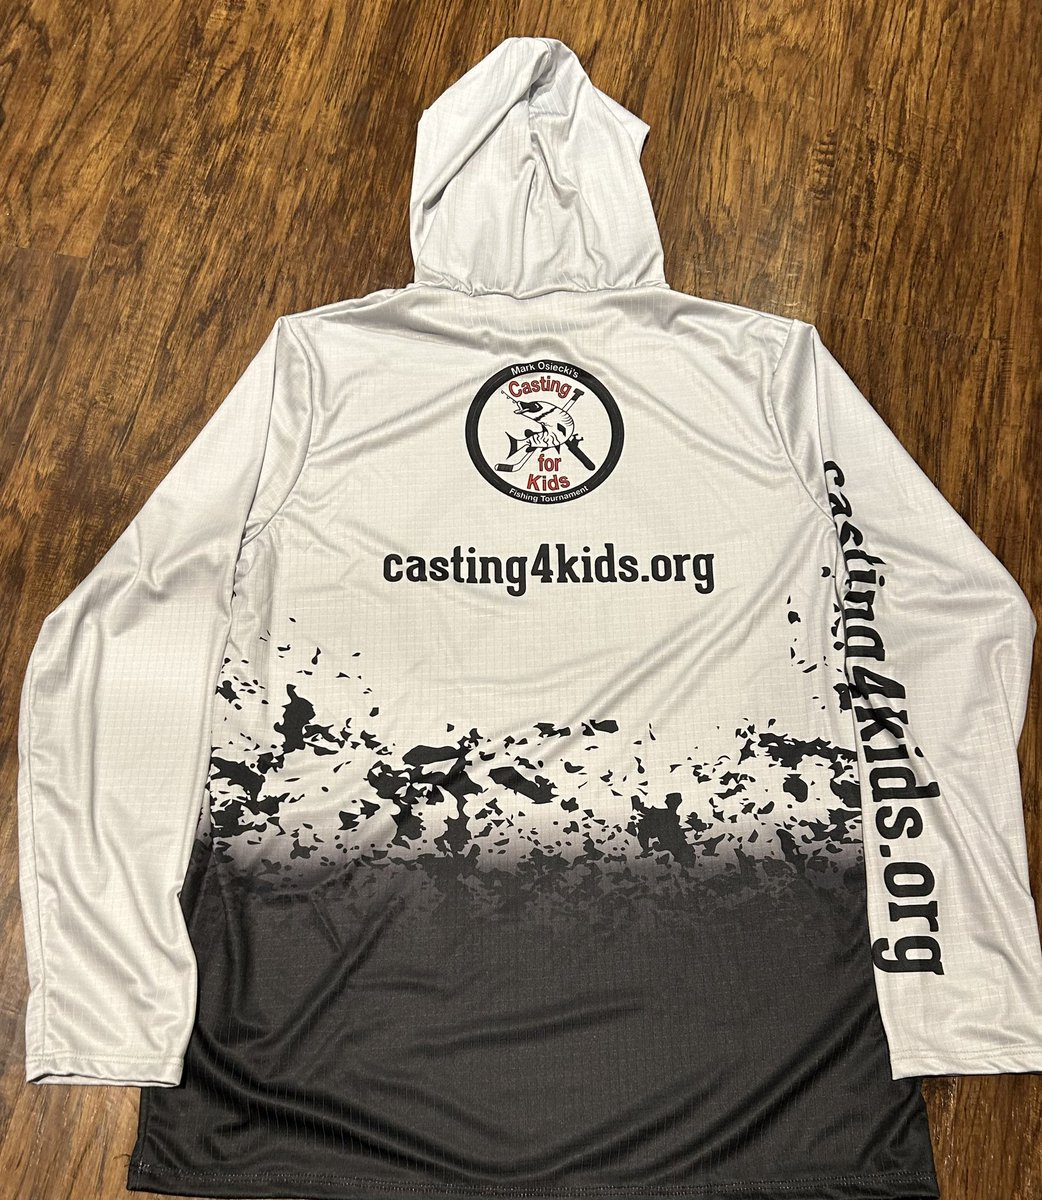 15 and 16 days until FUN!! 

May 18, 2024 for our annual casting4kids.org 

Get signed up today at:

casting4kids.org

Online Auction Ends May 19,2024:

go.eventgroovefundraising.com/casting4kids

@amfam Children’s Hospital @UWCarbone @UWHealth @WiscPediatrics  #casting4kids2024